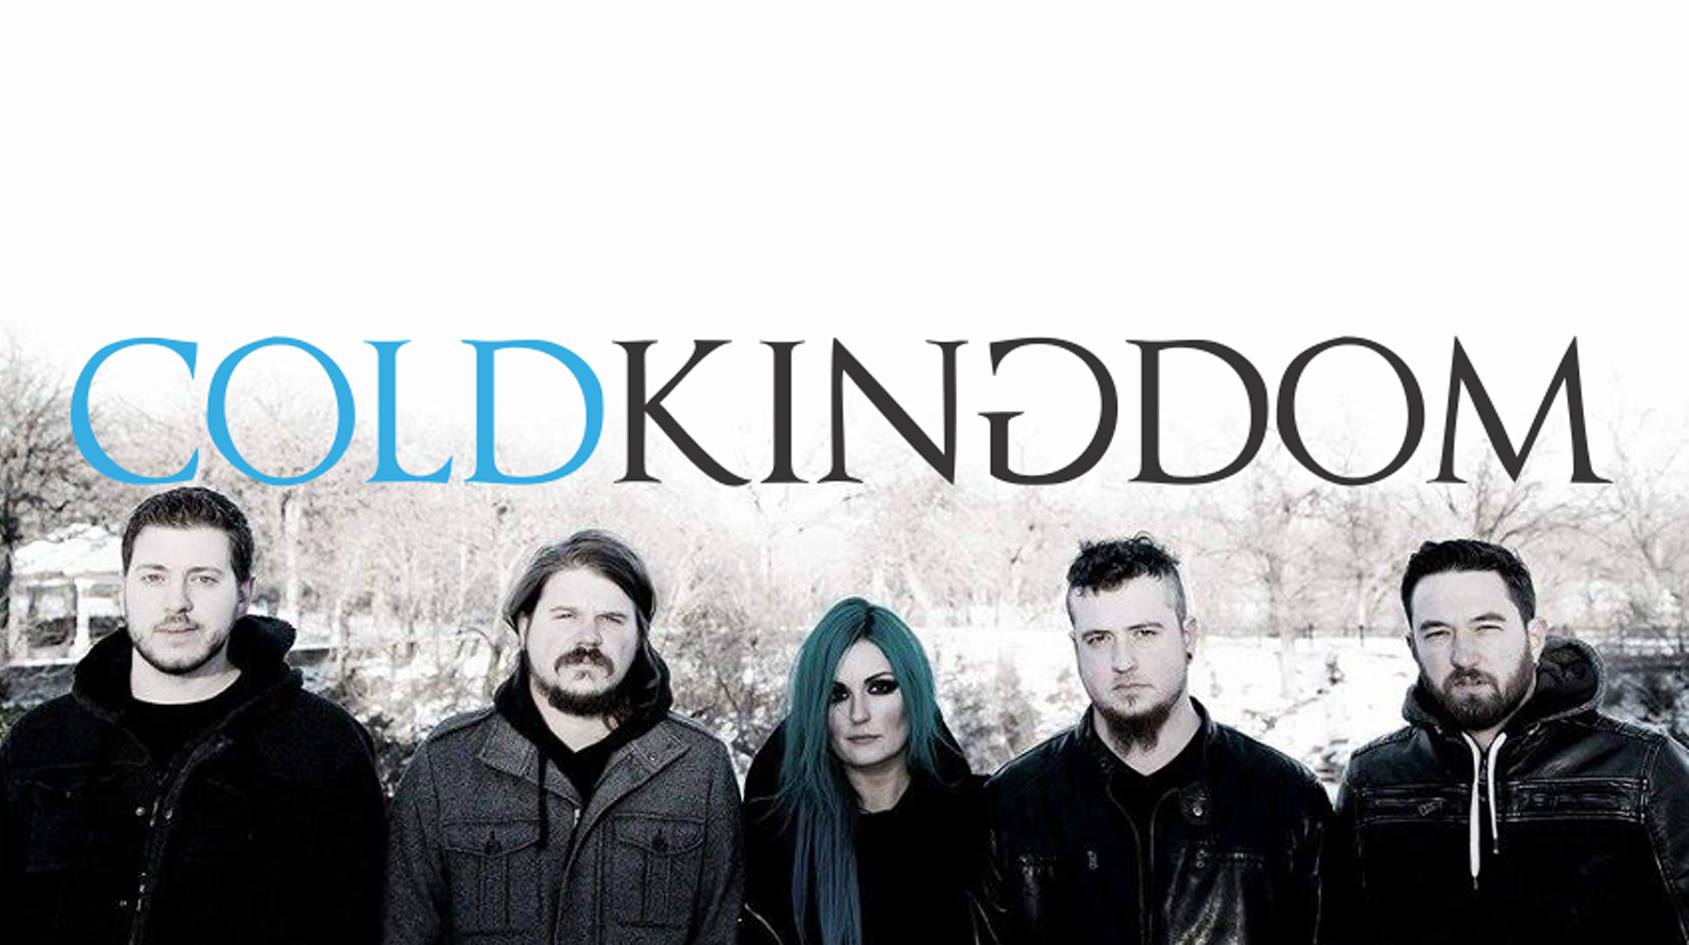 Live Music by Cold Kingdom at Chesterfield West in O'Neill, NE - 
						Minnesota Band Cold Kingdom     
						performing live at 
						St. Pat's at 
						Chesterfield West in O'Neill, Nebraska 
						on Friday, March 18, 2016.  
						Chesterfield West is located at 
						305 E Douglas Street, 
						O'Neill, NE 68763, 
						Phone: (402) 336-1818.